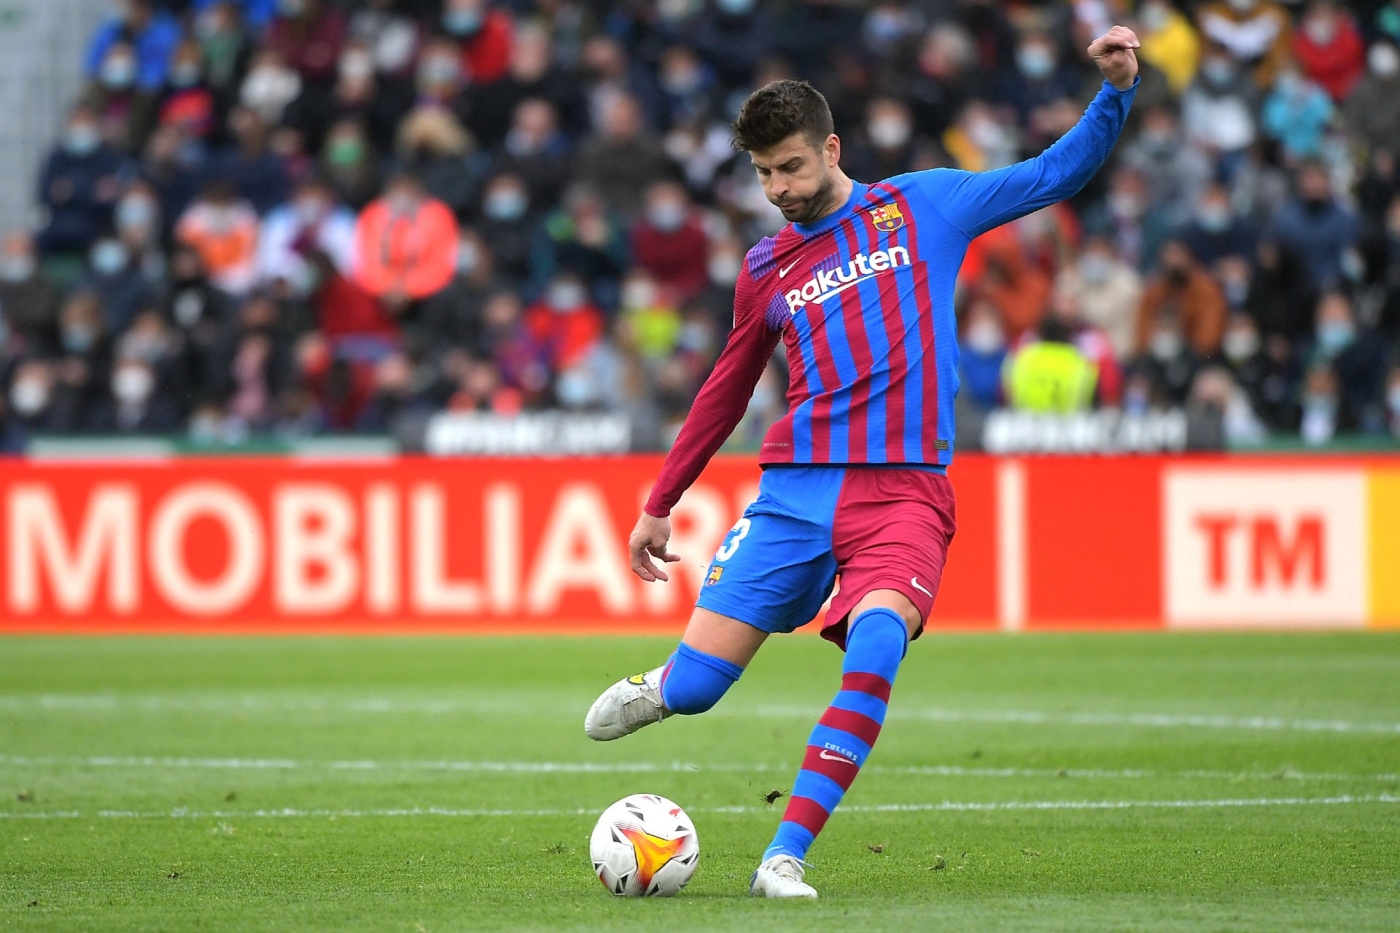 Barcelona's Gerard Pique kicks the ball during a match between Elche CF and FC Barcelona on 6 March 2022 (AFP/File photo)